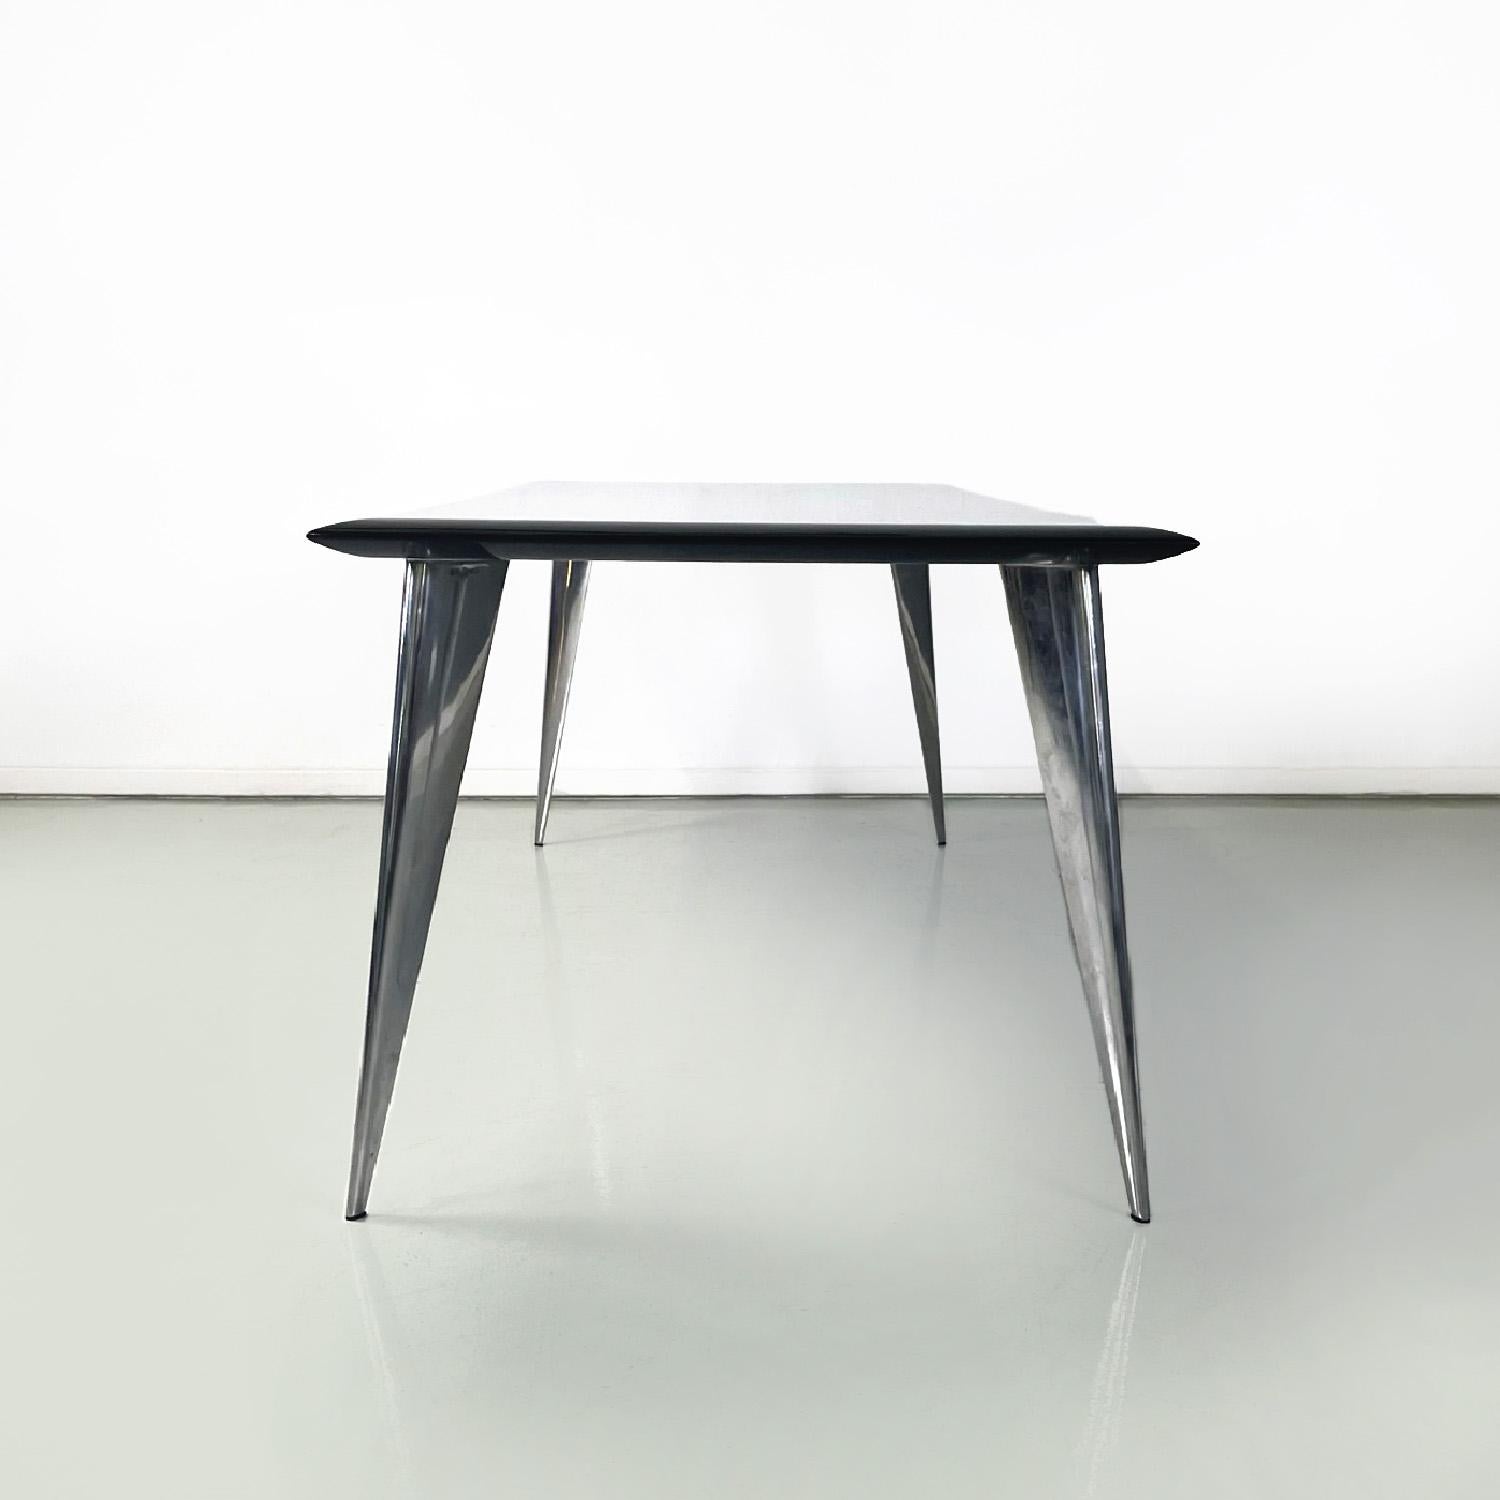 Italian modern black dining table M by Philippe Starck for Driade Aleph, 1980s In Good Condition For Sale In MIlano, IT